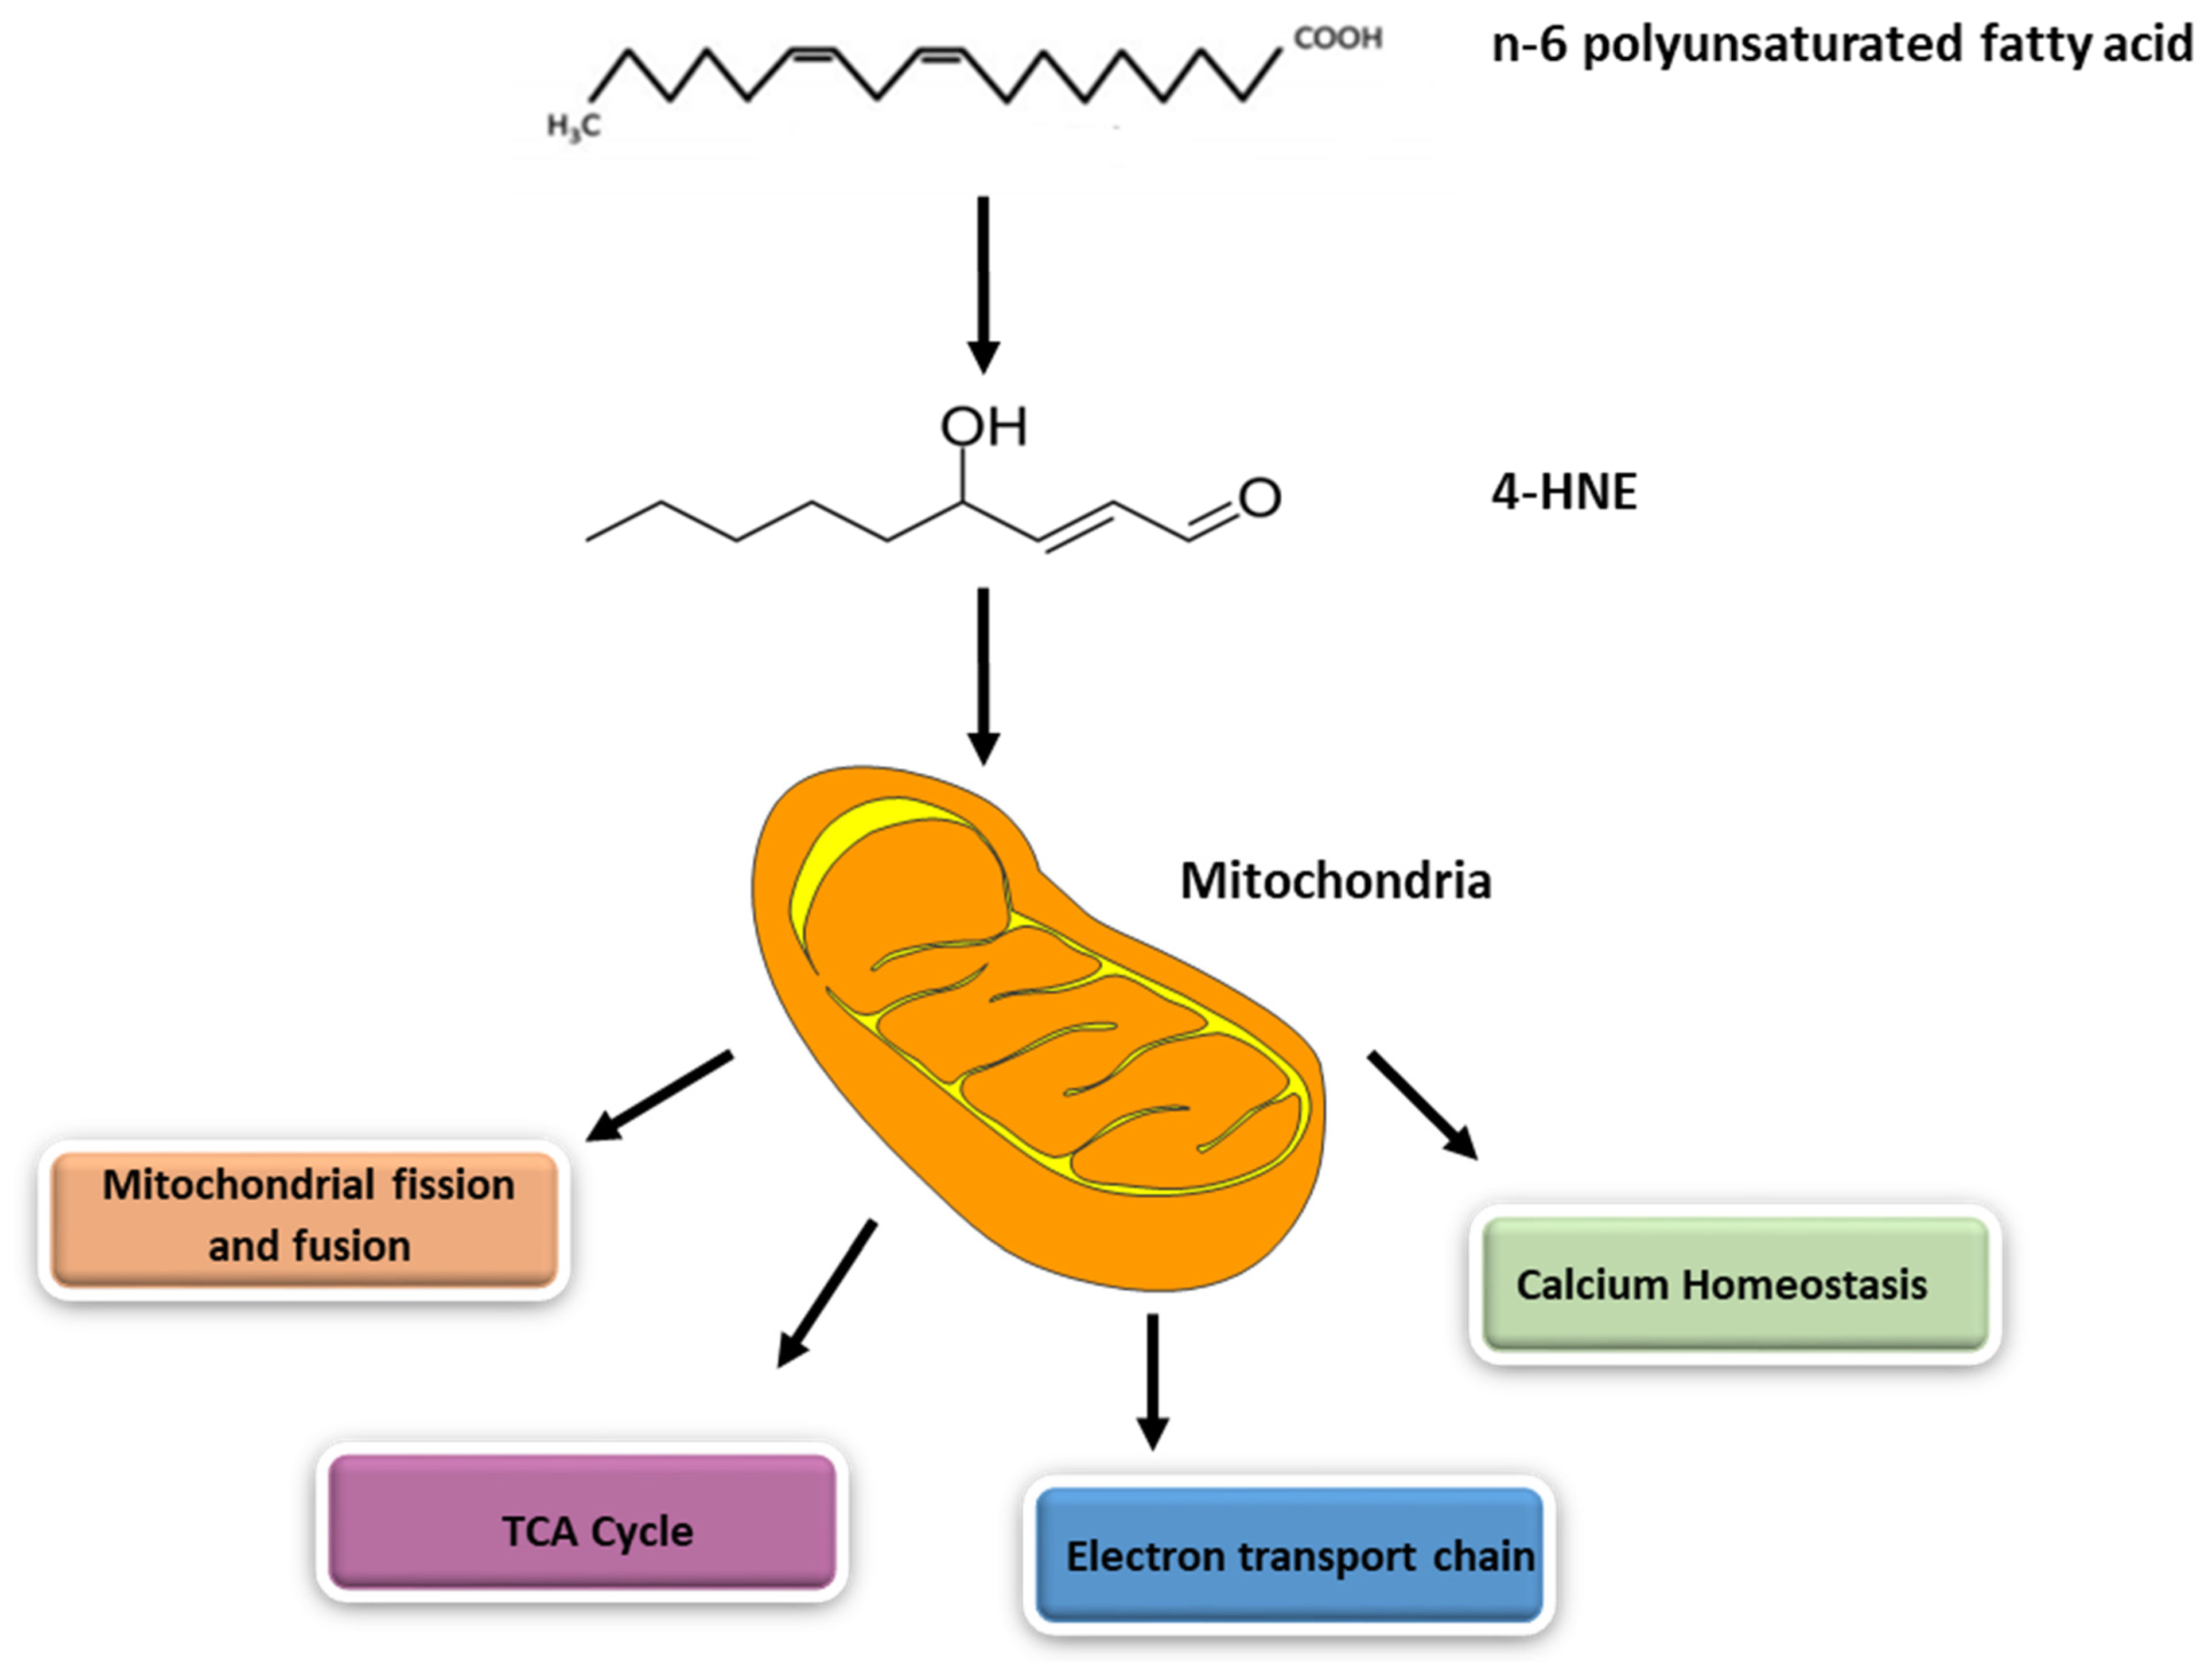 Biomolecules | Free Full-Text | Electrophilic Aldehyde 4-Hydroxy-2-Nonenal  Mediated Signaling and Mitochondrial Dysfunction | HTML